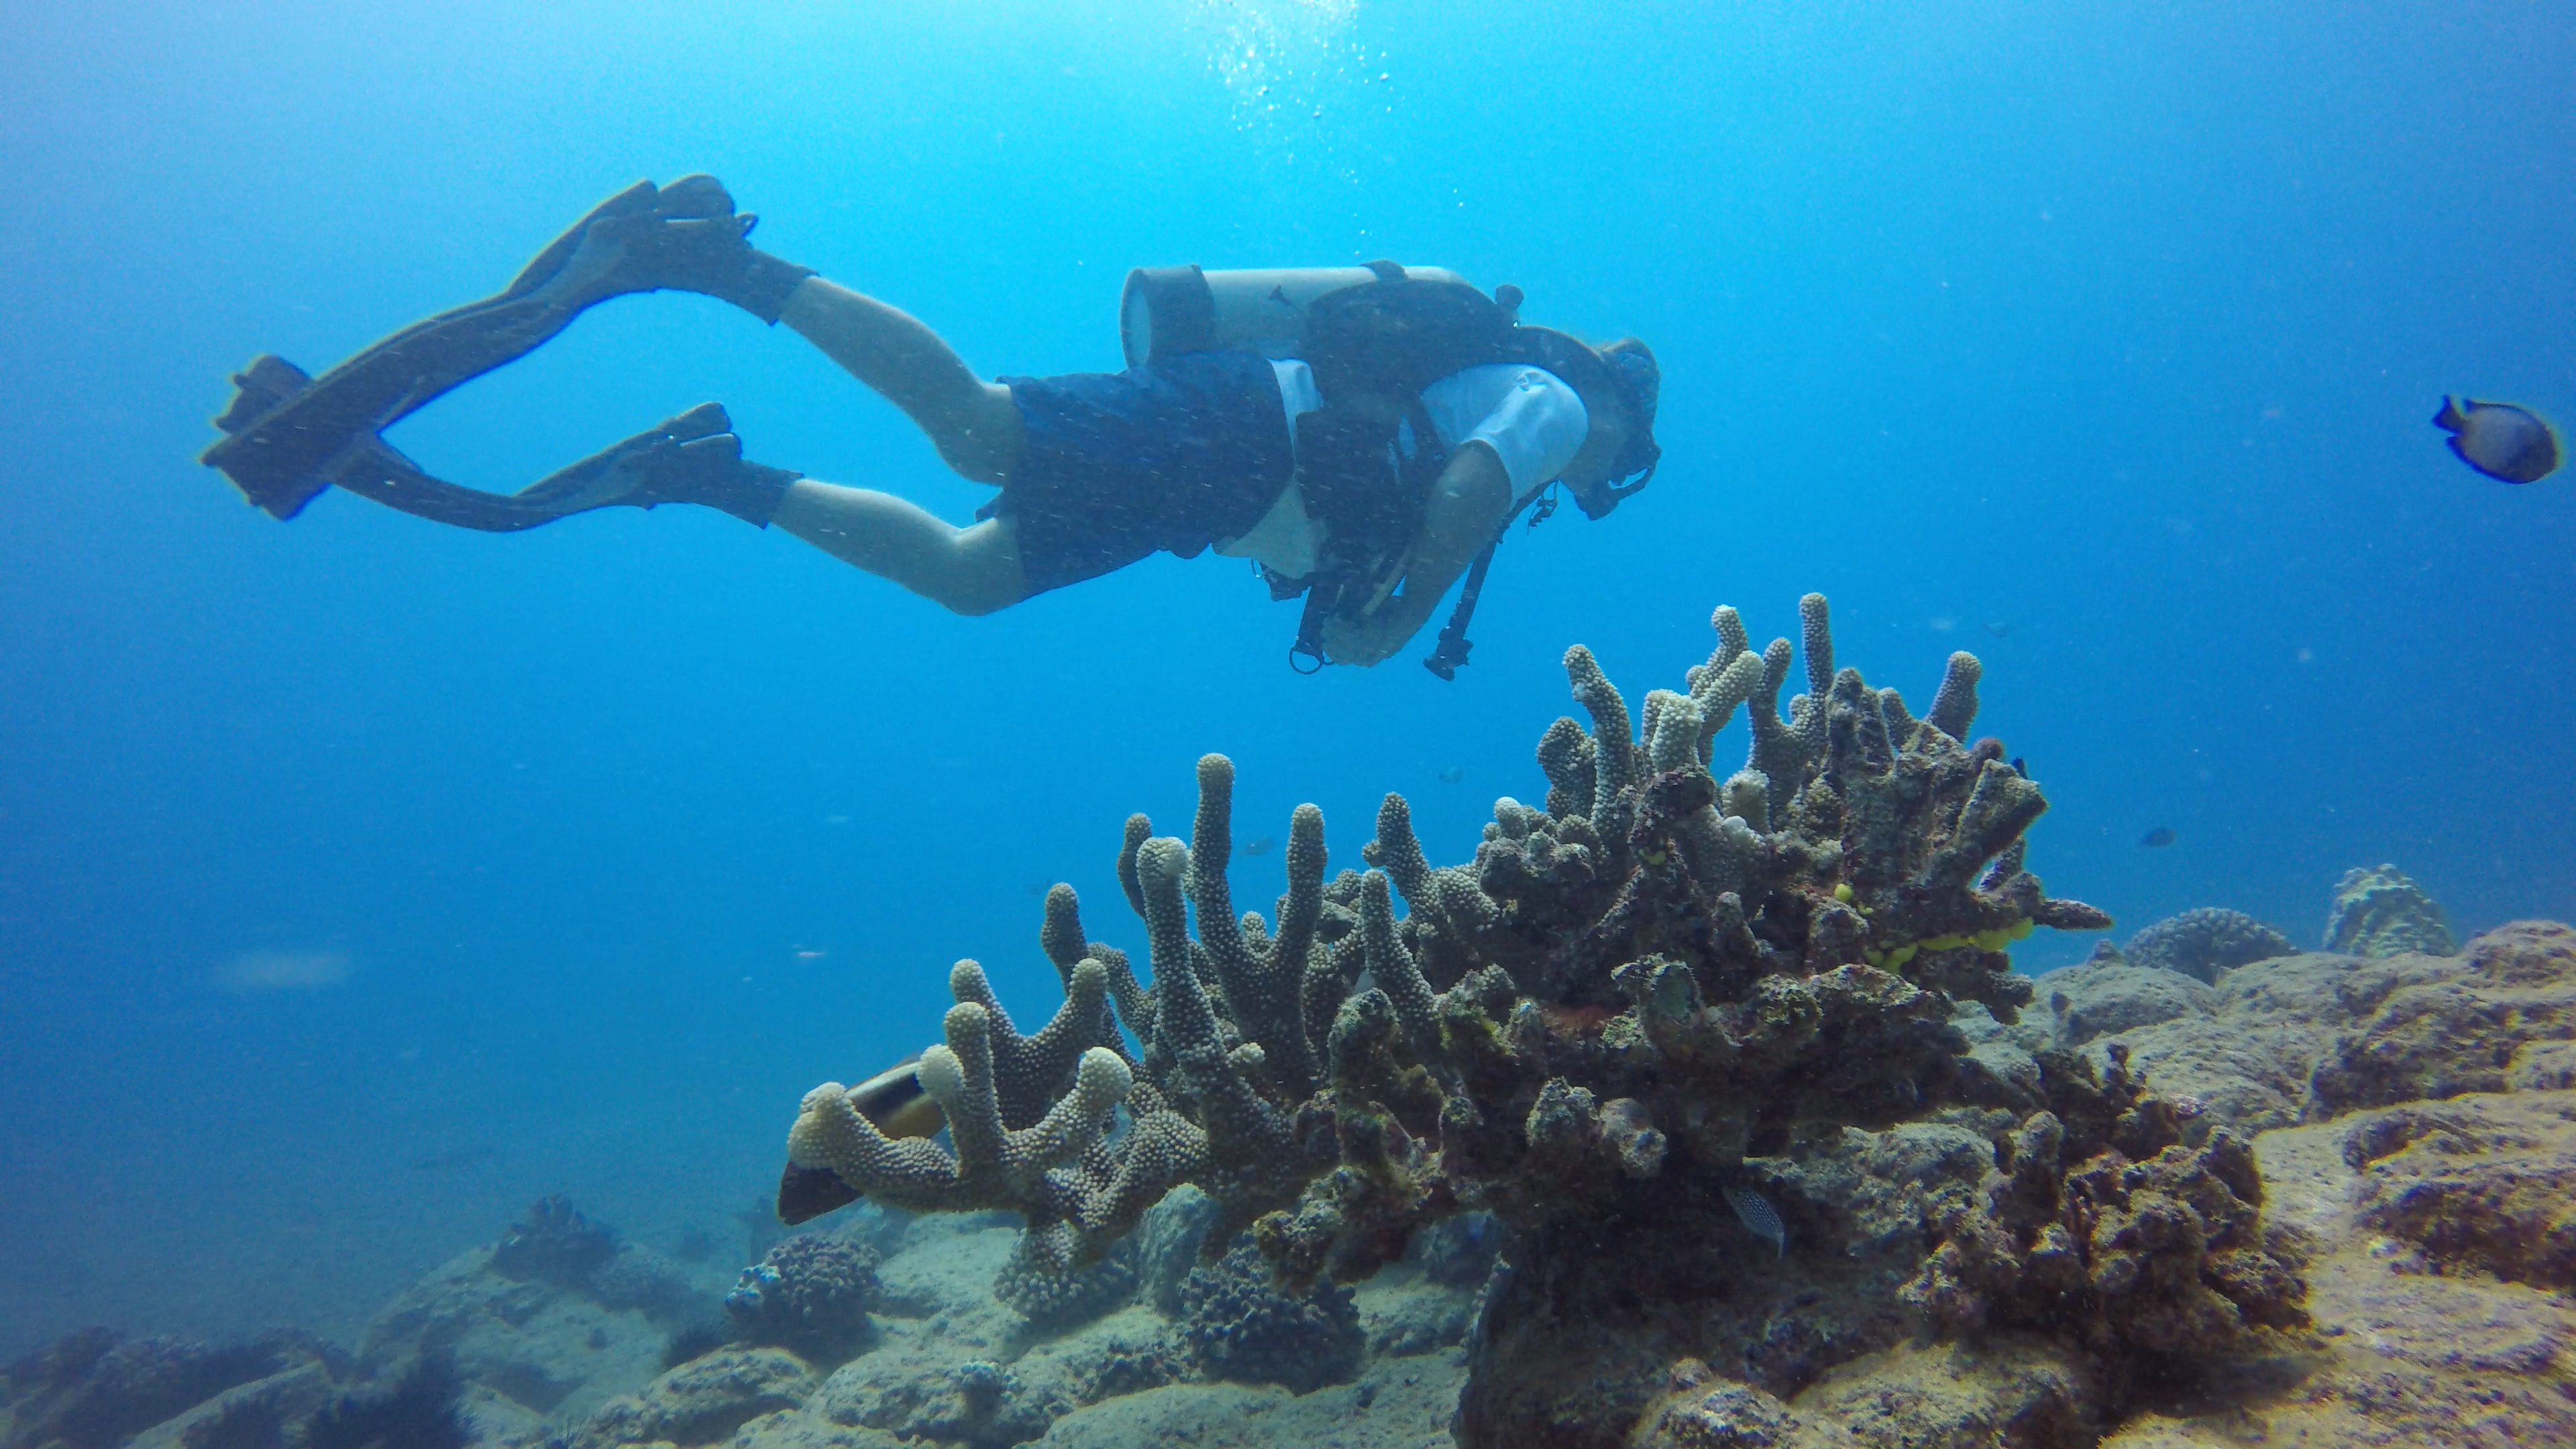 Image of diver swimming above reef